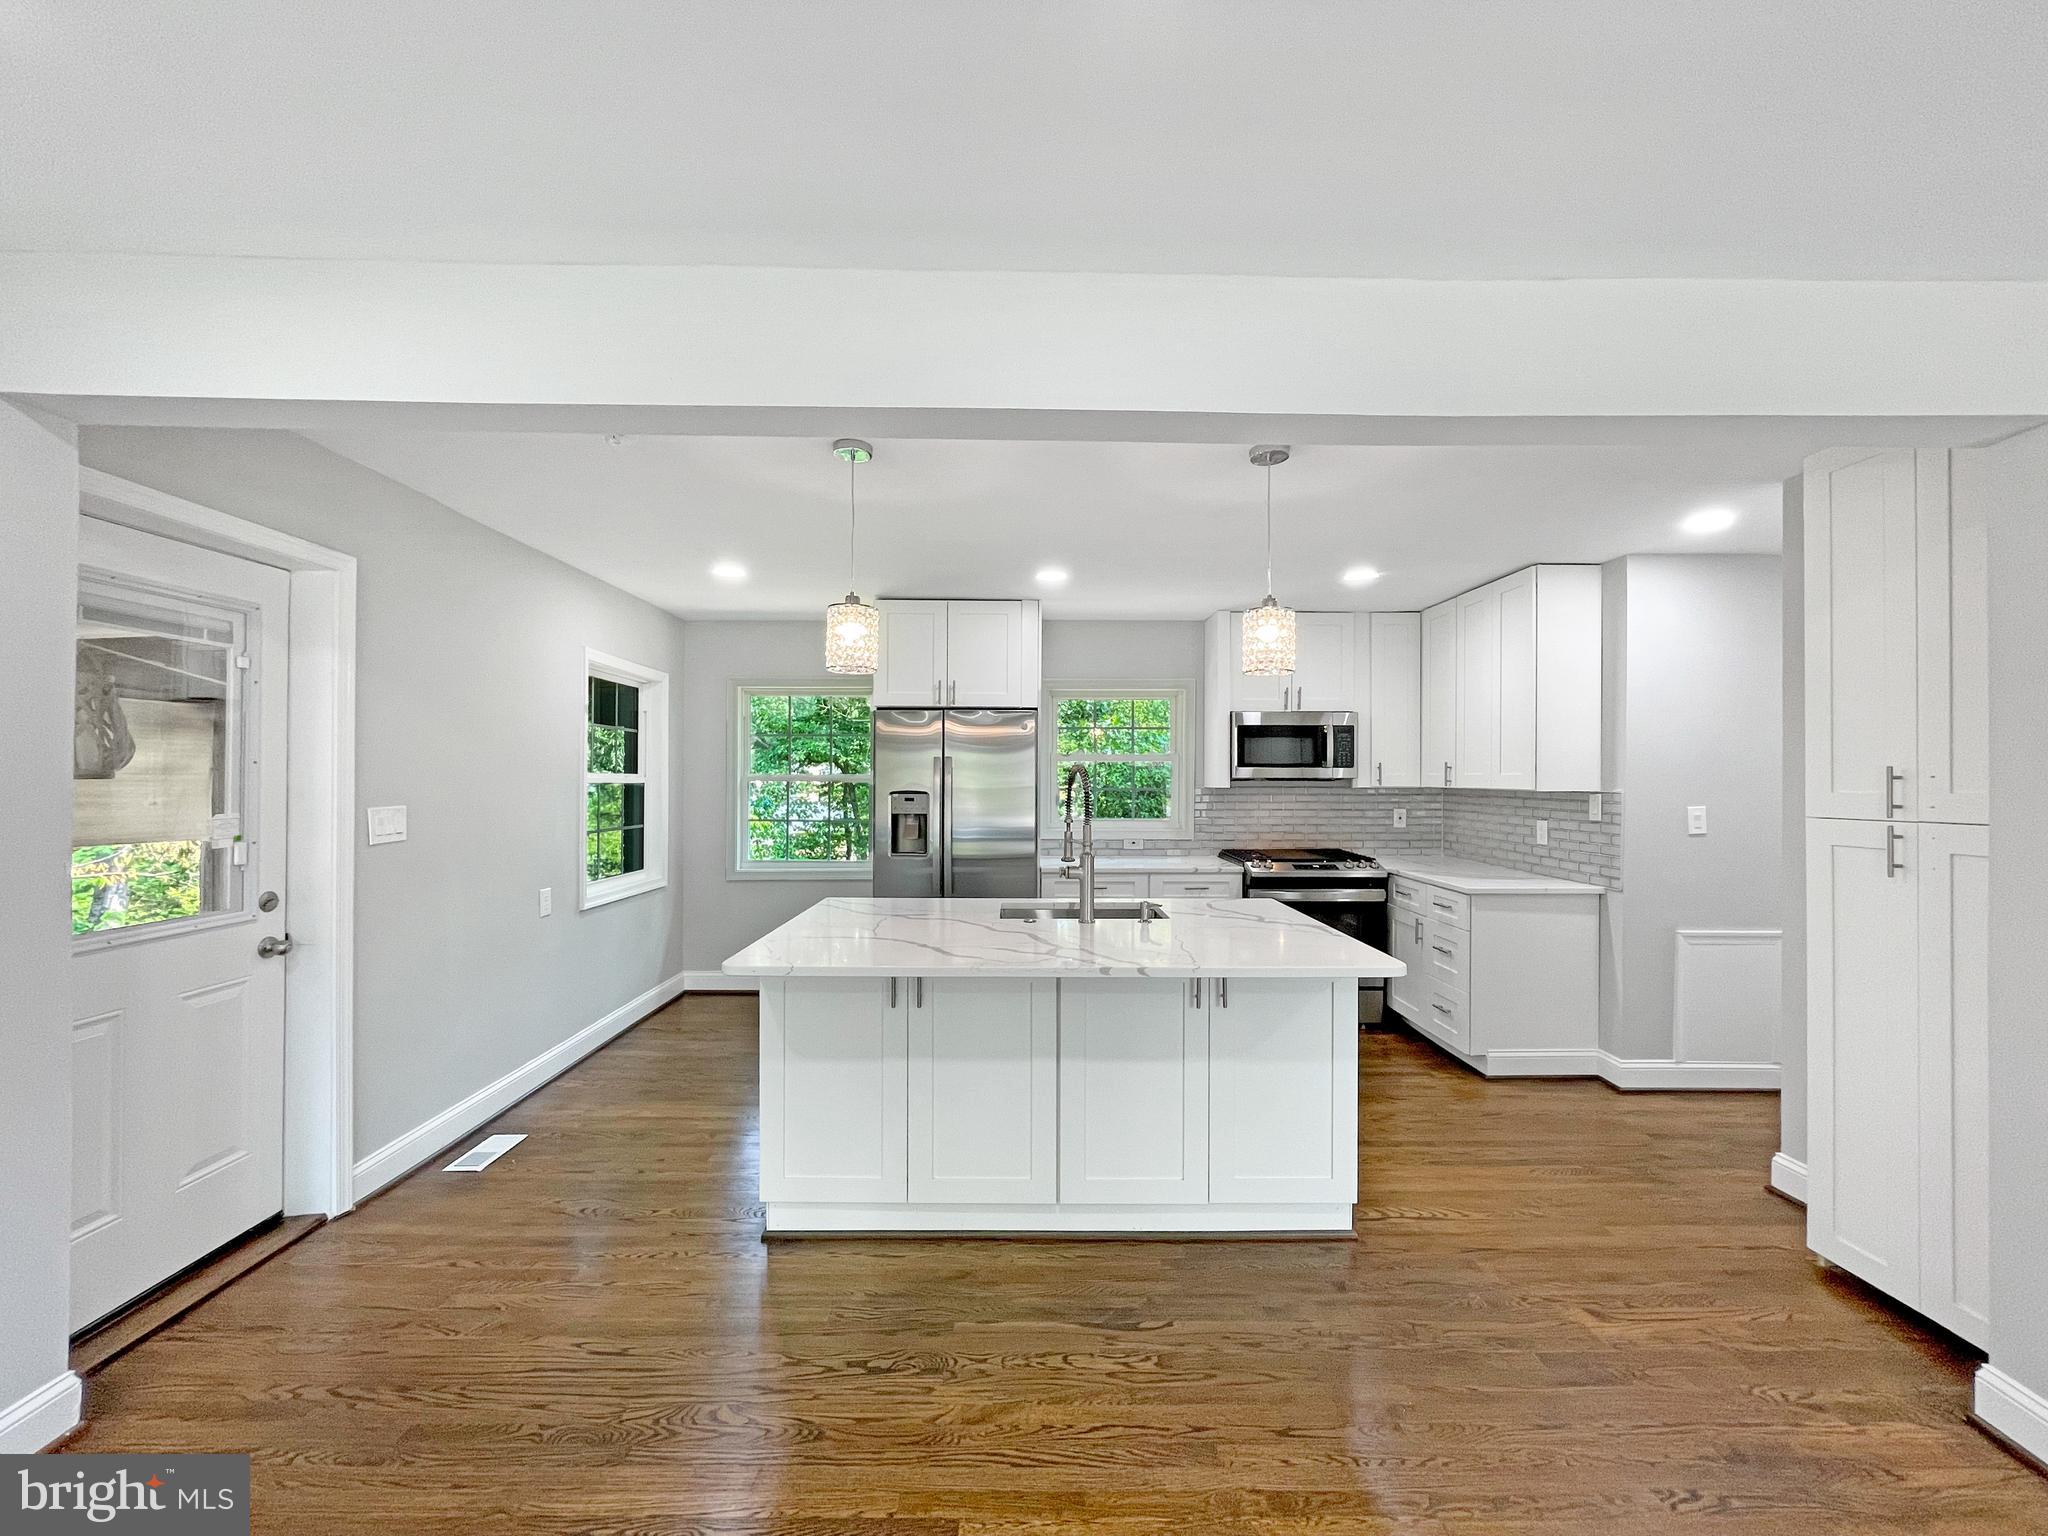 a view of kitchen with kitchen island a refrigerator a stove a sink dishwasher with a dining table and chairs